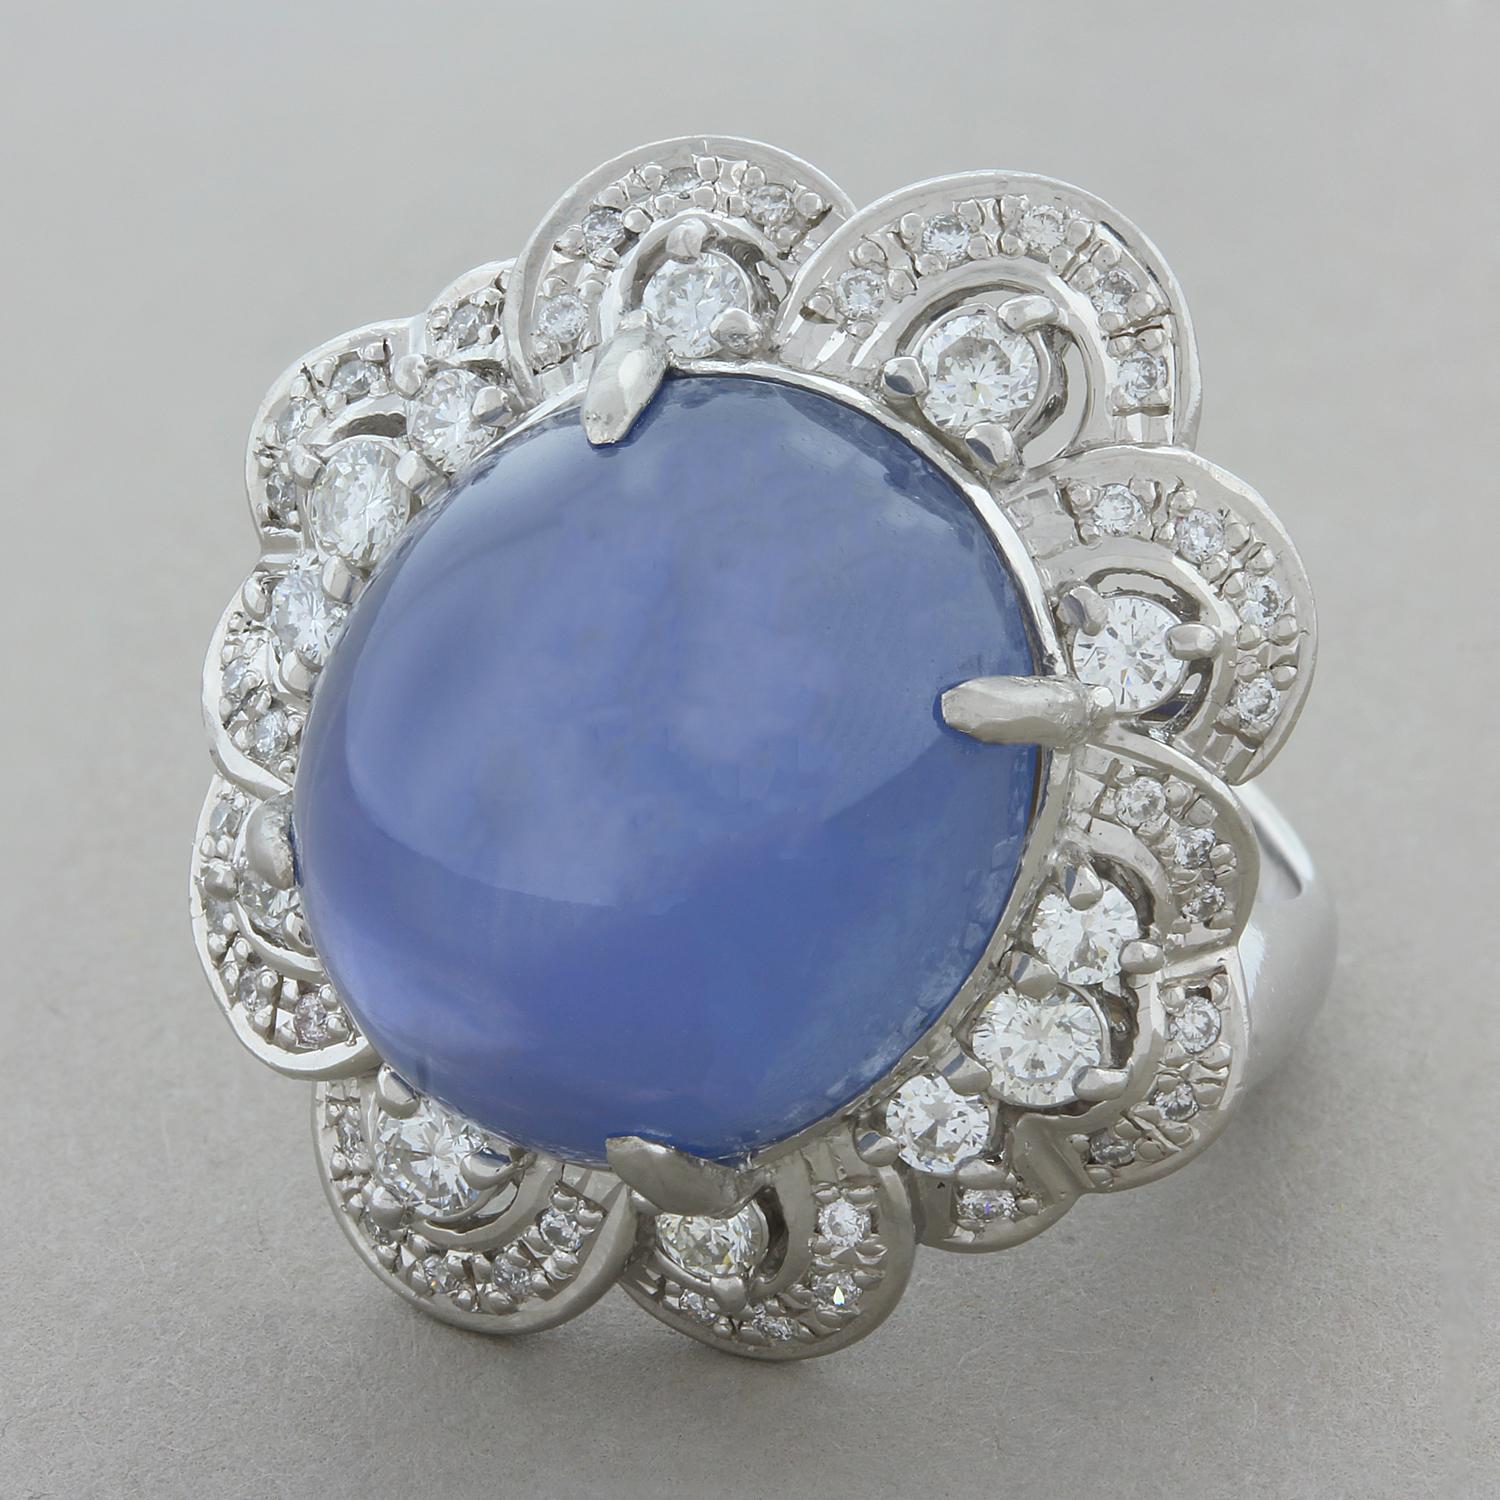 This distinguished ring features a 30.14 carat cabochon star sapphire with a lovely velvety blue hue. The star sapphire gives life to this extravagant ring set in platinum with a swirling halo of 1.24 carats of diamonds creating a classic and